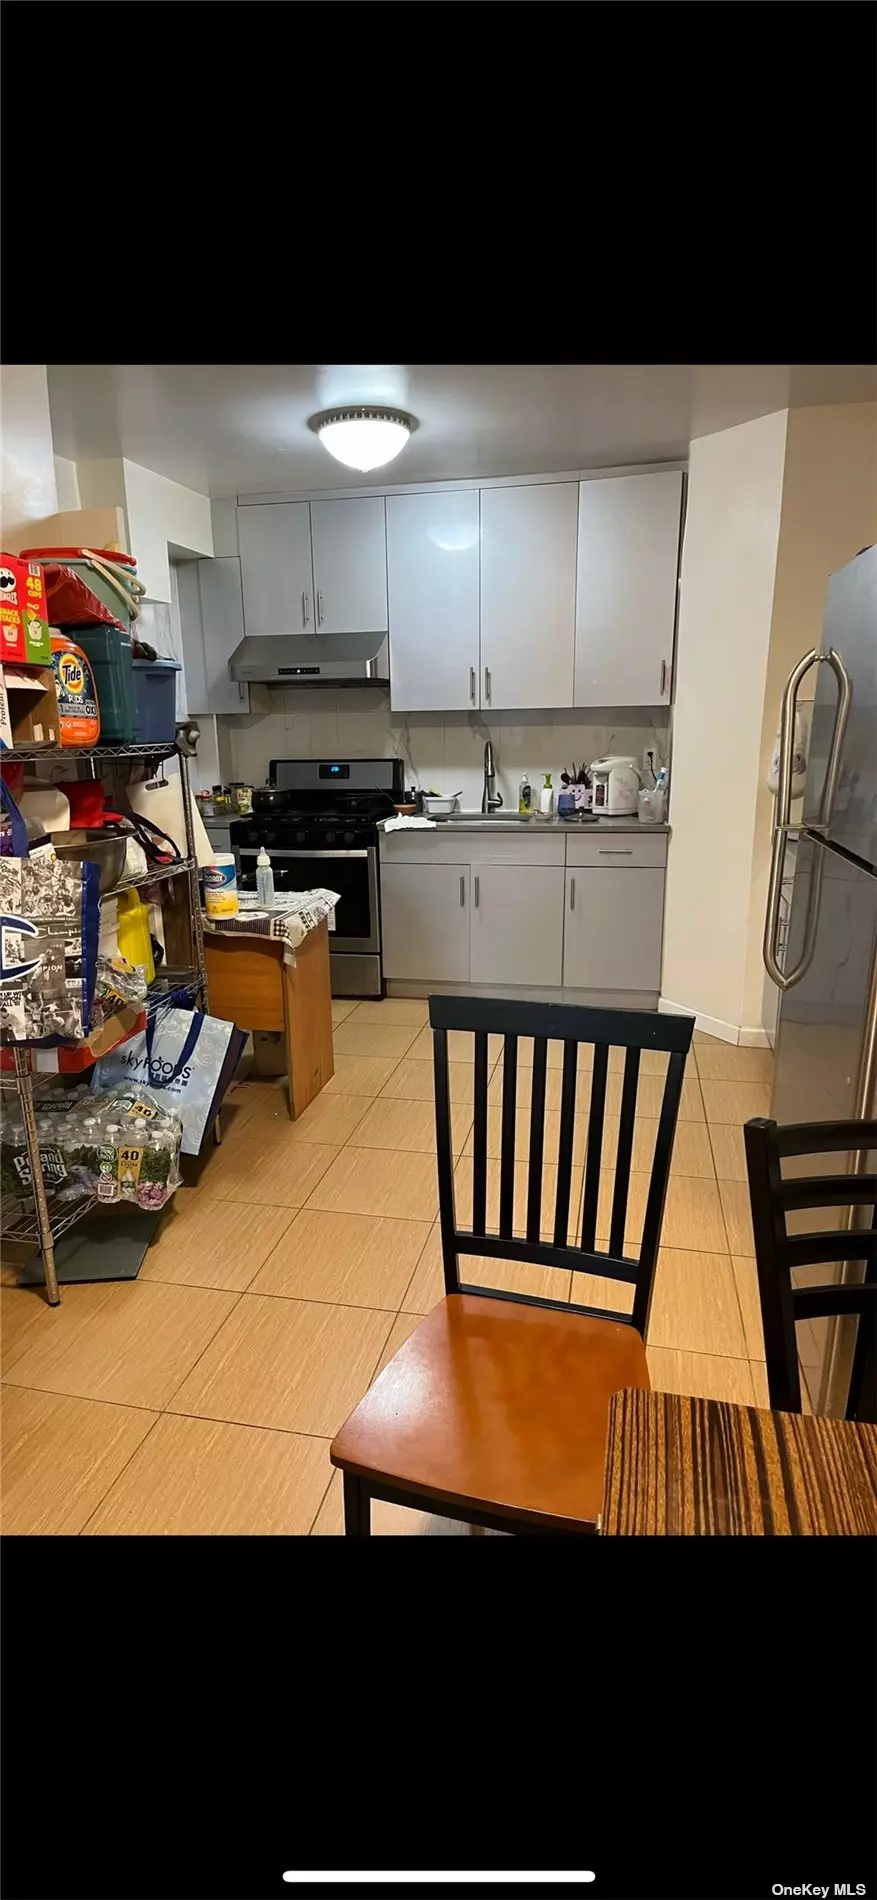 Rarely find Large kitchen space Full Renovated apt on first floor no interview required. Pets friendly .cash only please verify your proof of funding & credit score